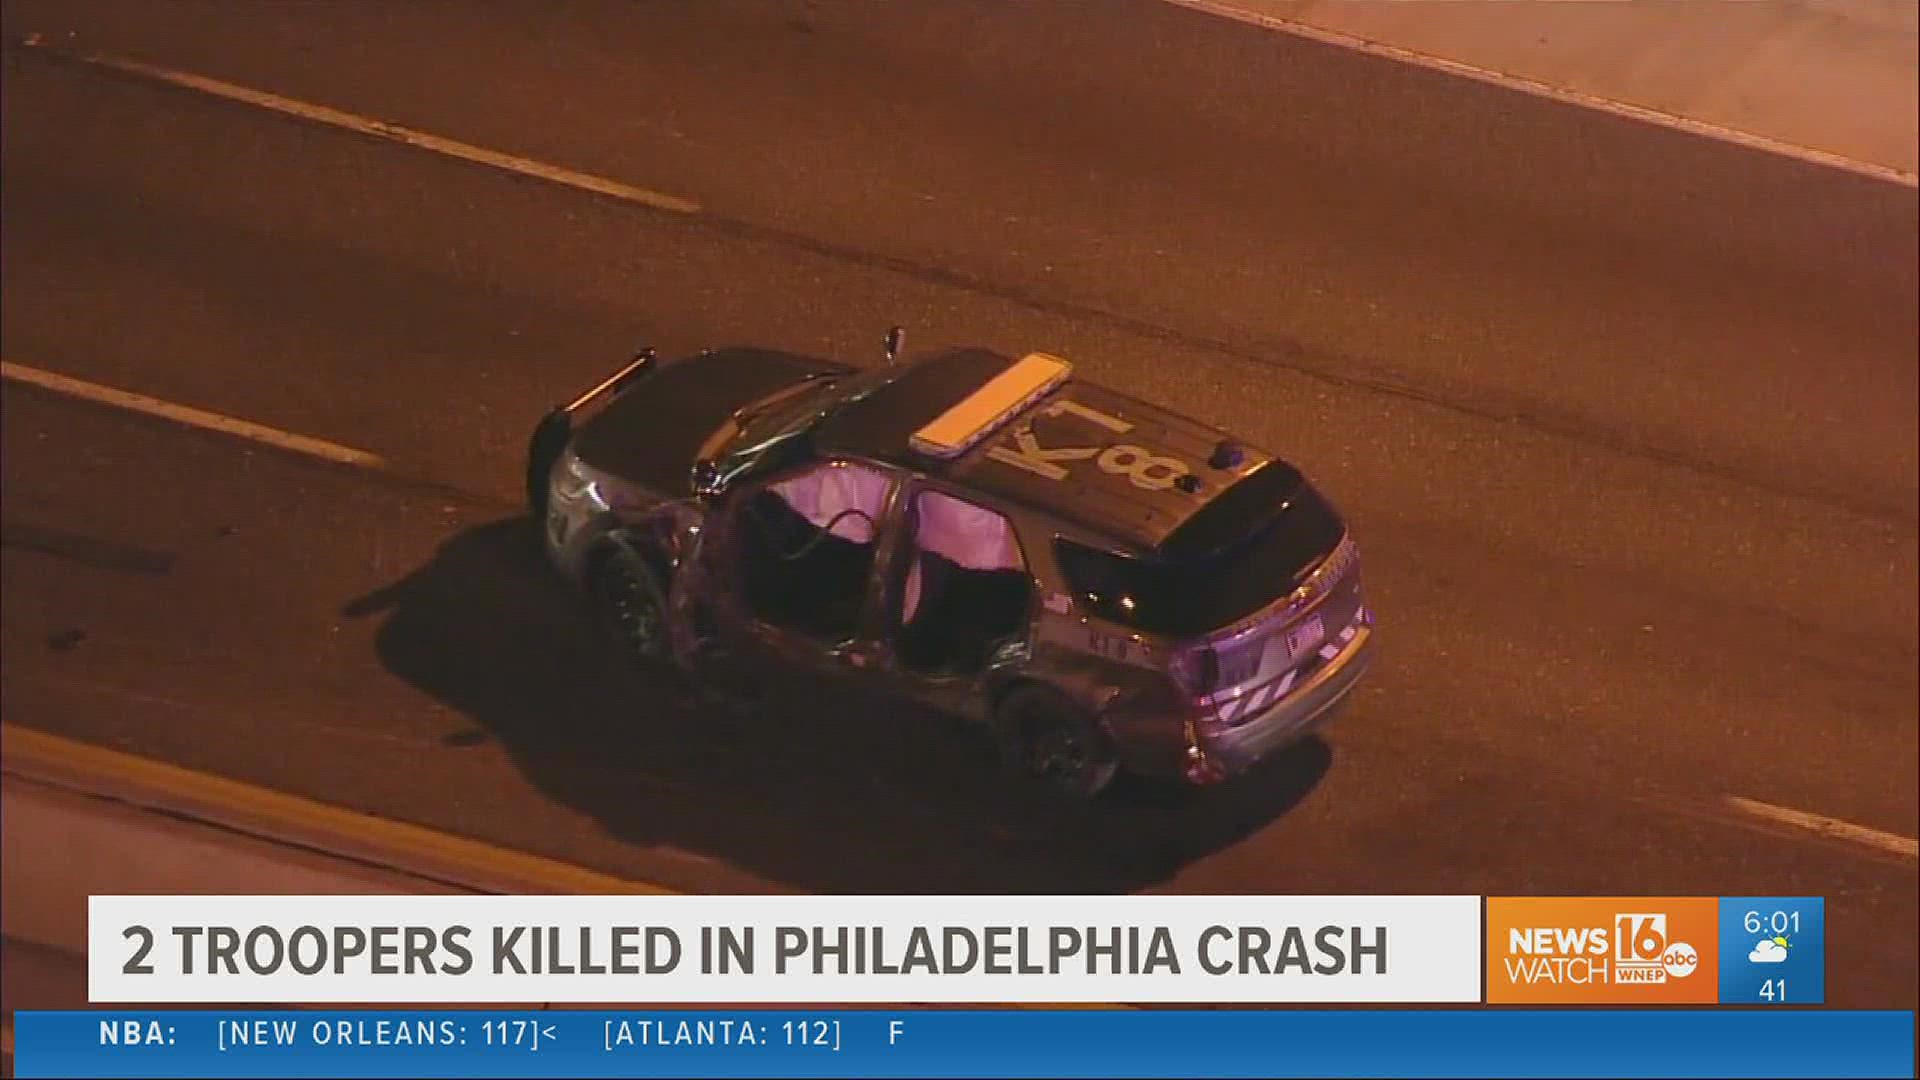 Two Pennsylvania state troopers and a third person were hit and killed during a traffic stop in Philadelphia.